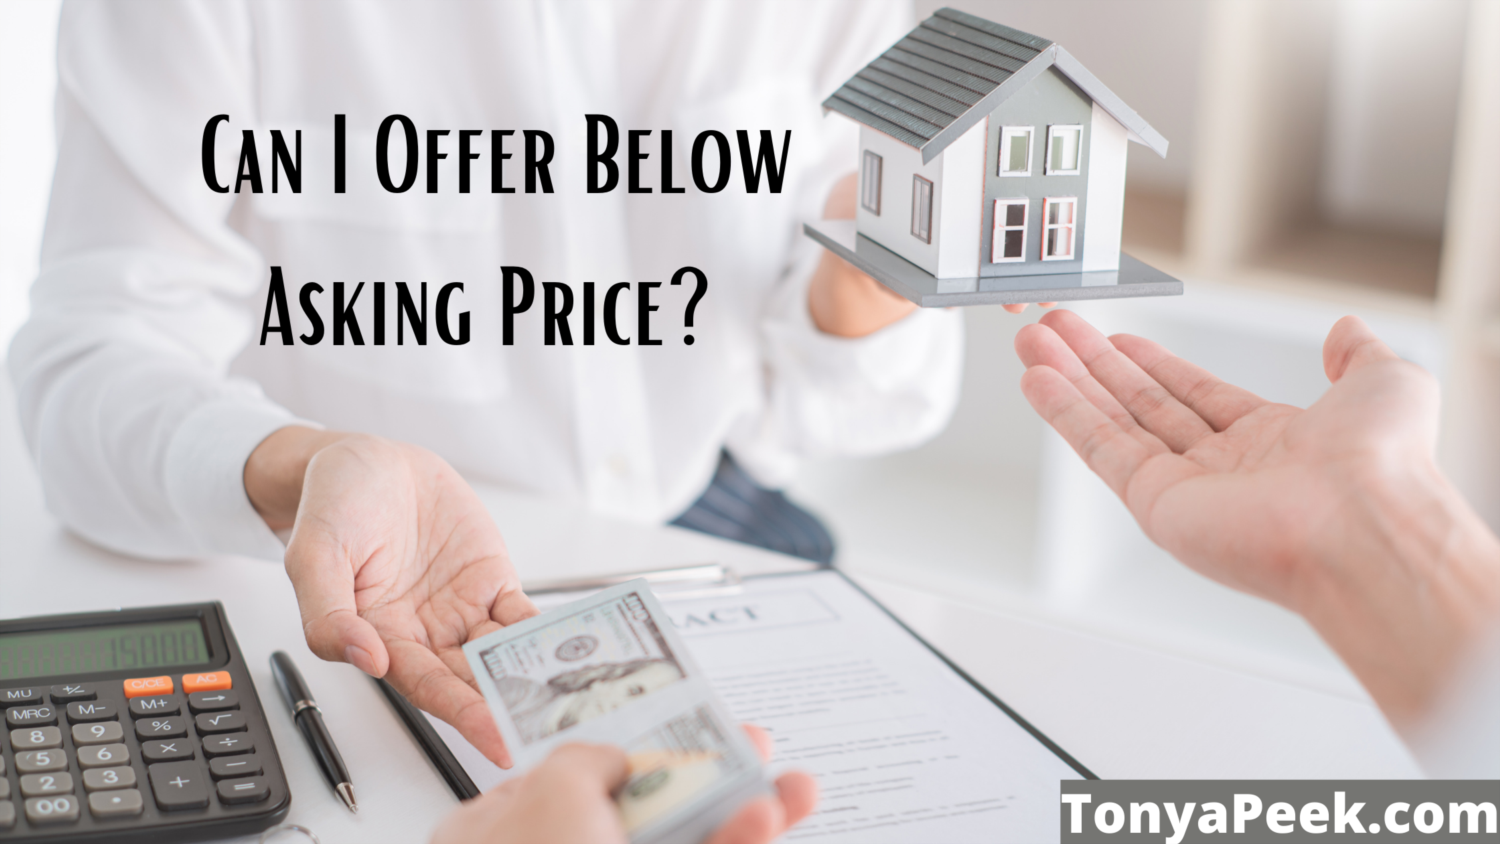 Is it Safe to Offer Below Asking Price?